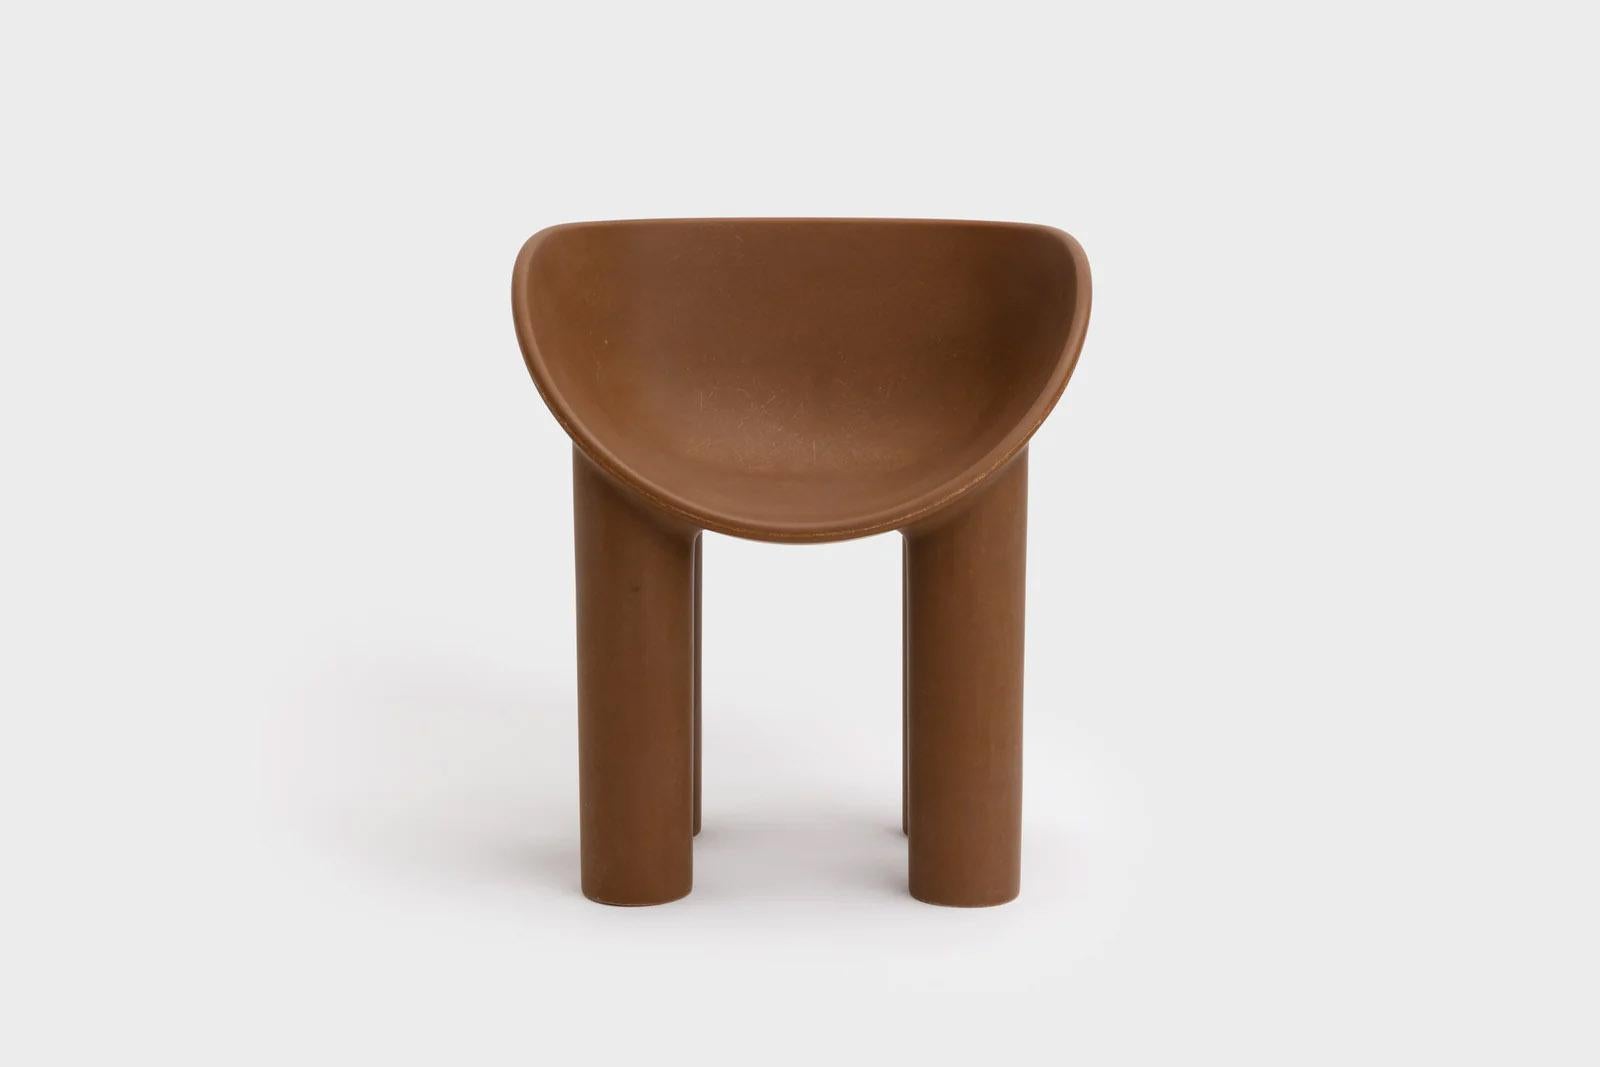 Contemporary fiberglass chair - Roly Poly Dining Chair by Faye Toogood. This is shown in the chestnut fiberglass finish. 
Design: Faye Toogood
Material: Fiberglass 
Available also in raw, cream or charcoal finish, please contact us.

The Roly Poly